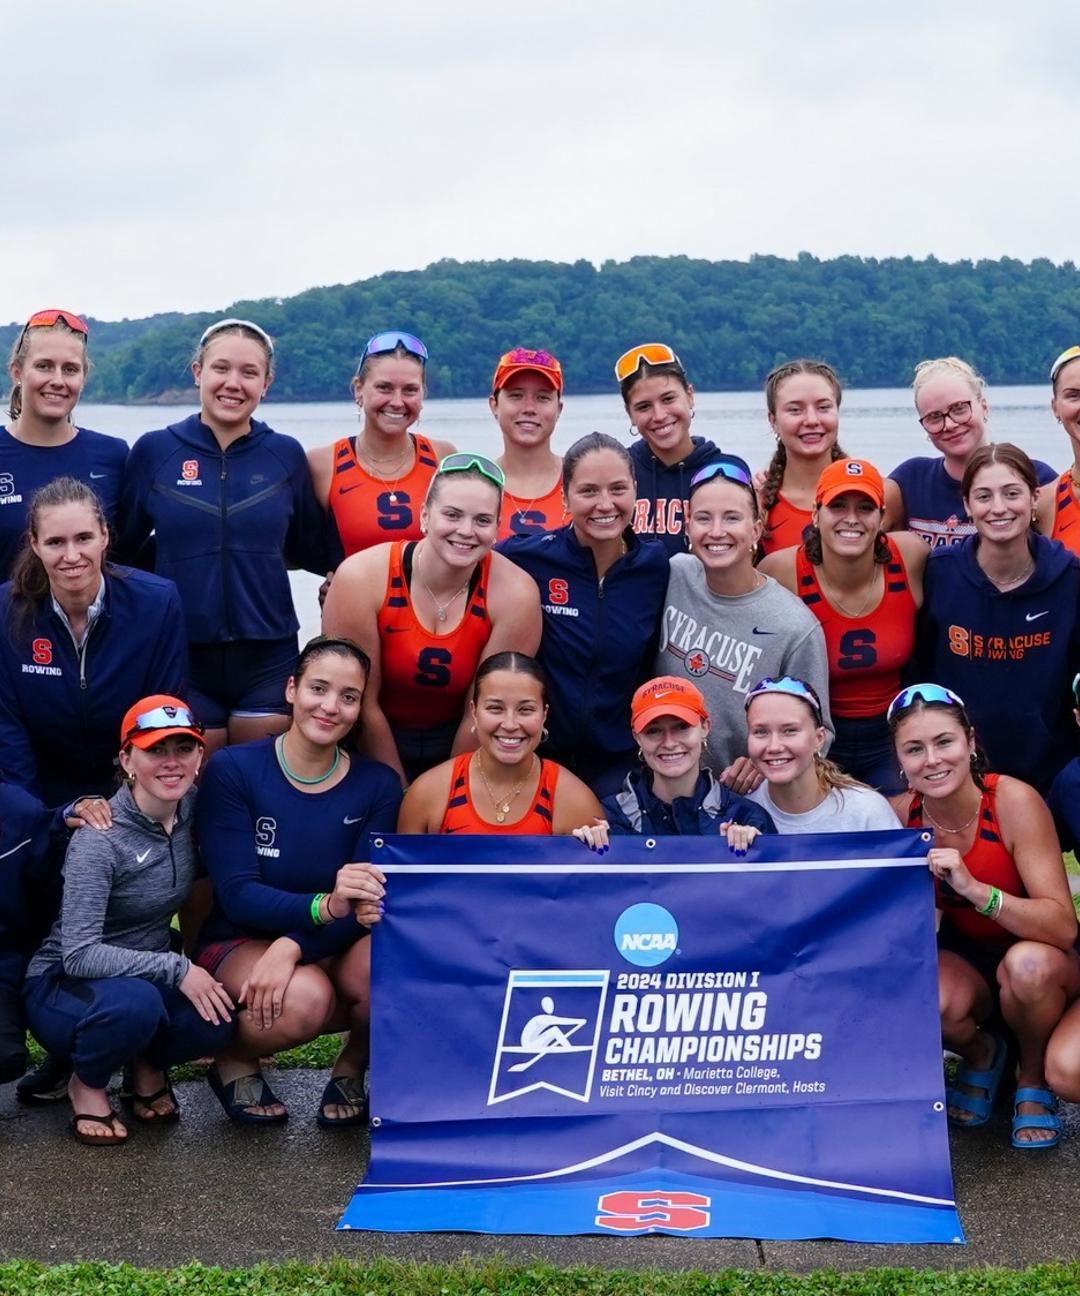 Image related to Syracuse Places 11th at NCAA Championship